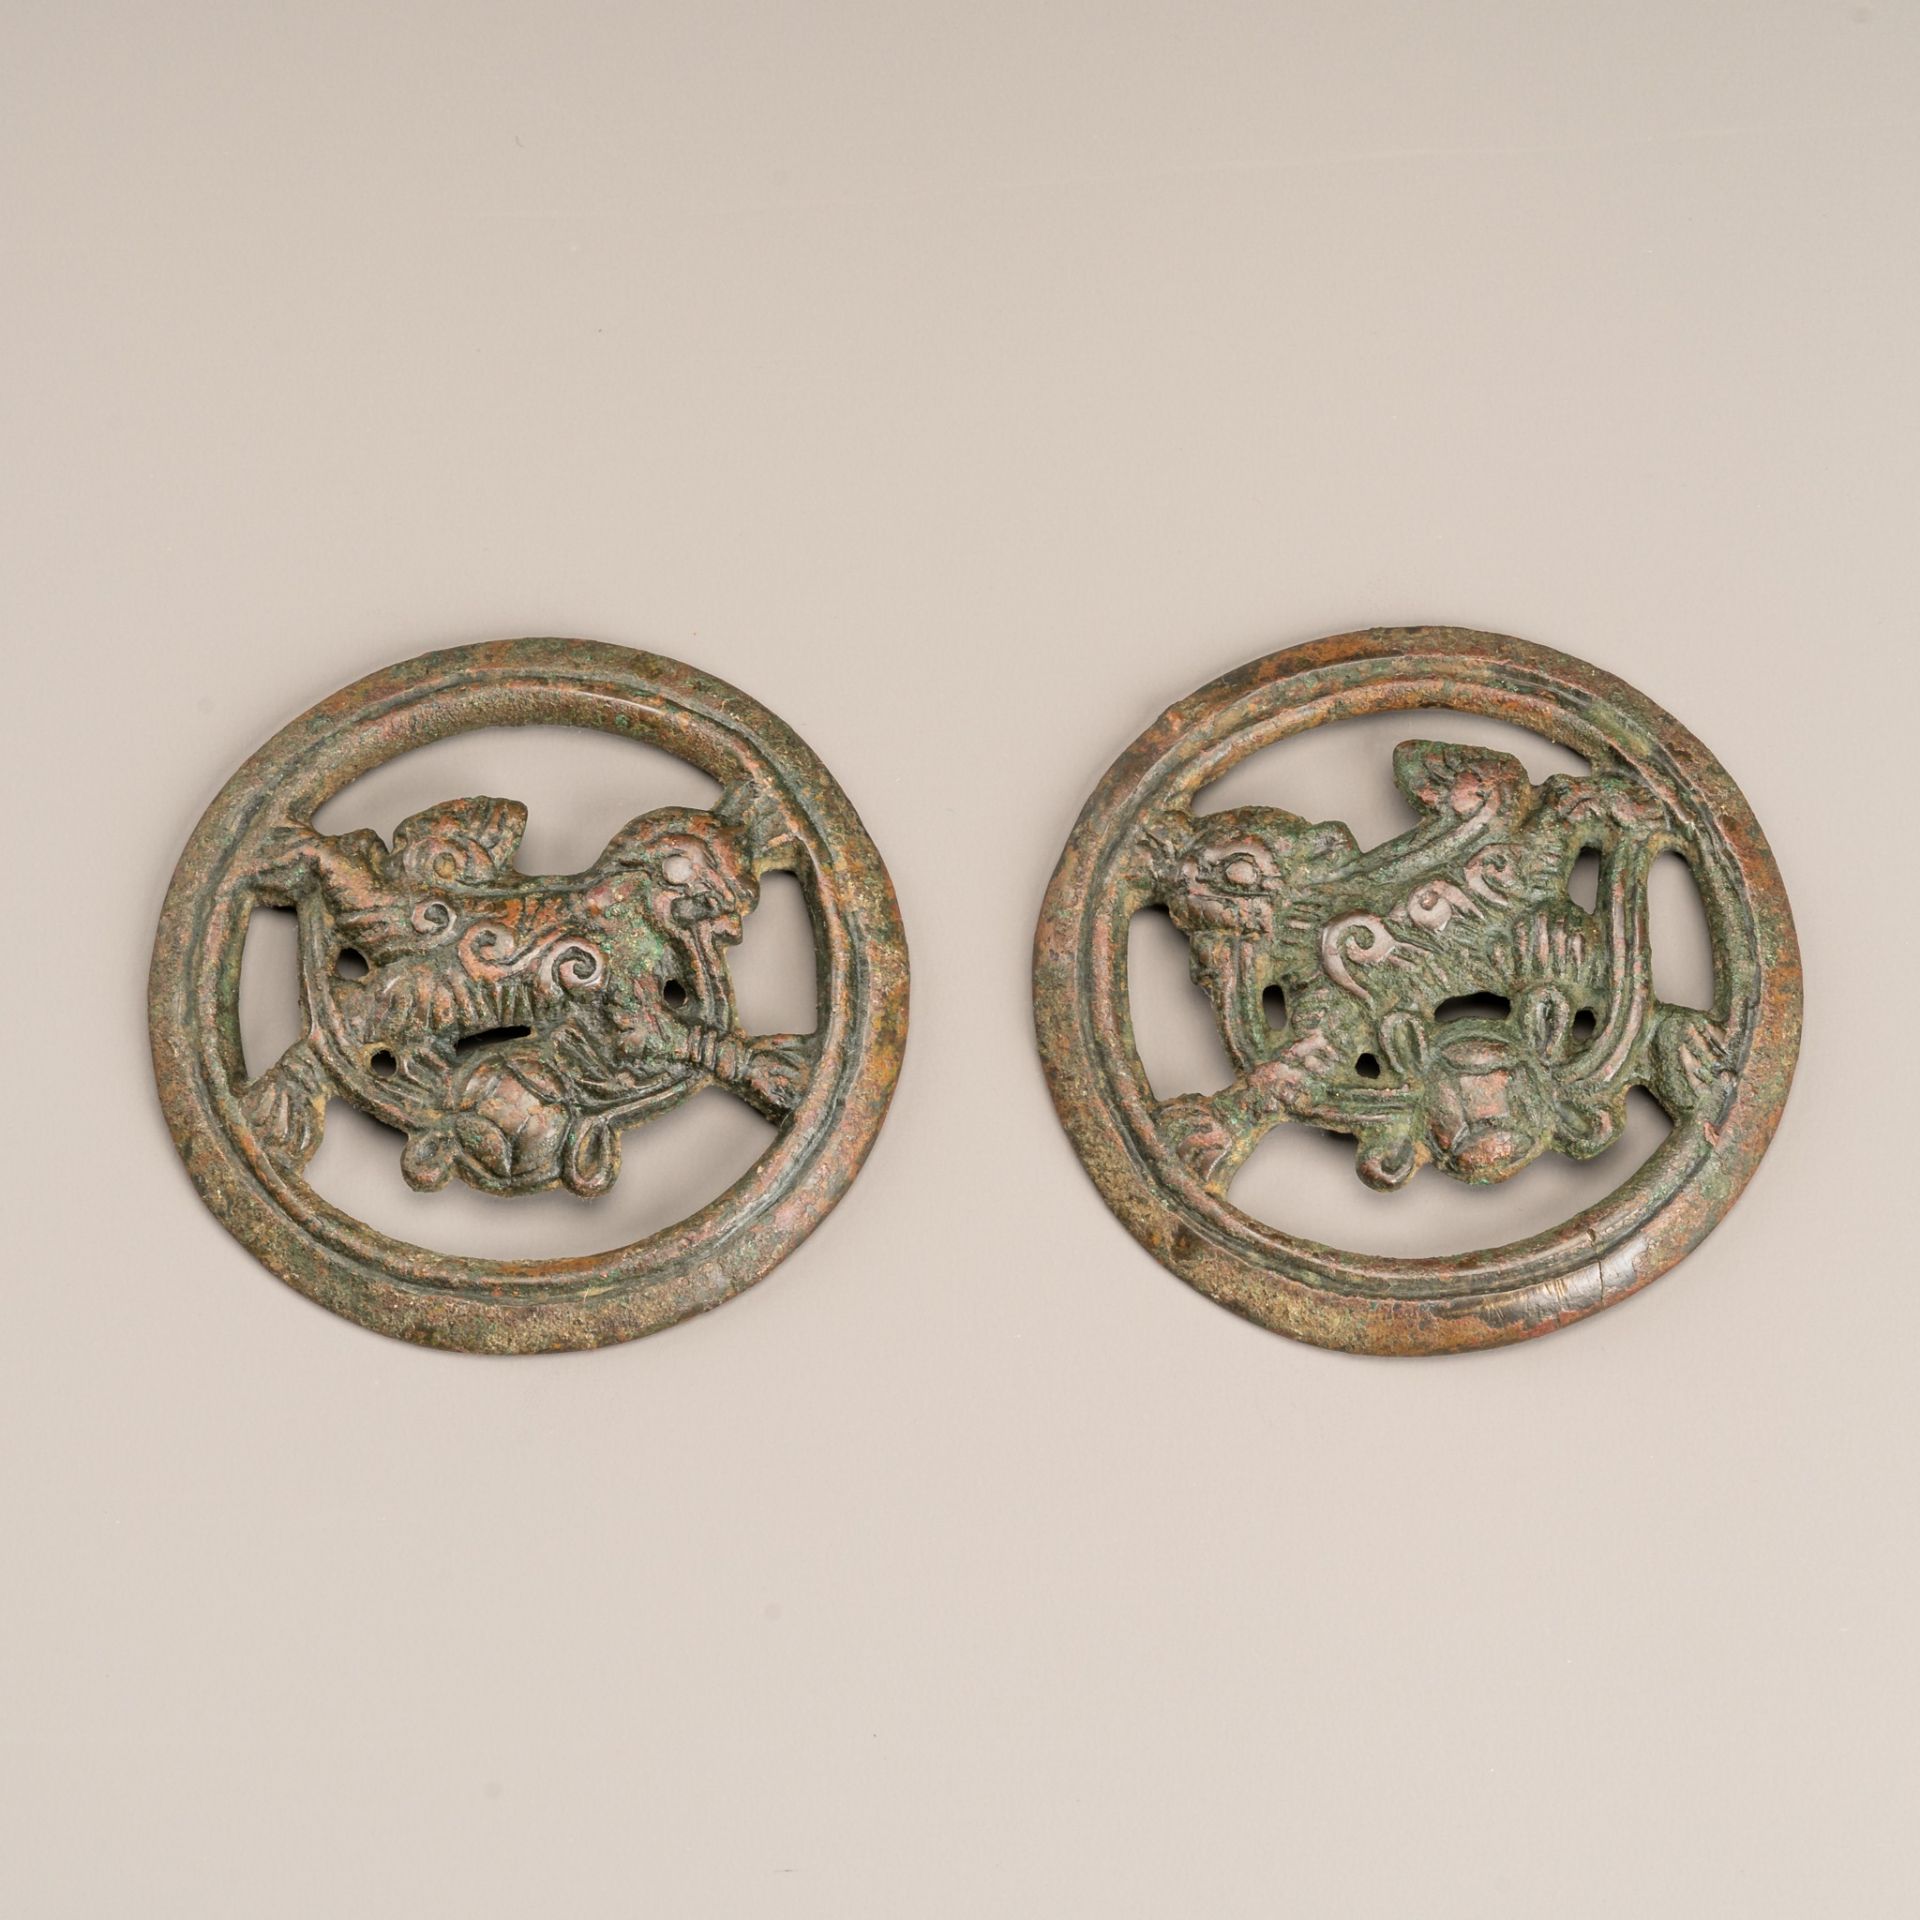 A PAIR OF BRONZE HORSE TRACK 'BUDDHIST LION' ORNAMENTS, MING OR EARLIER